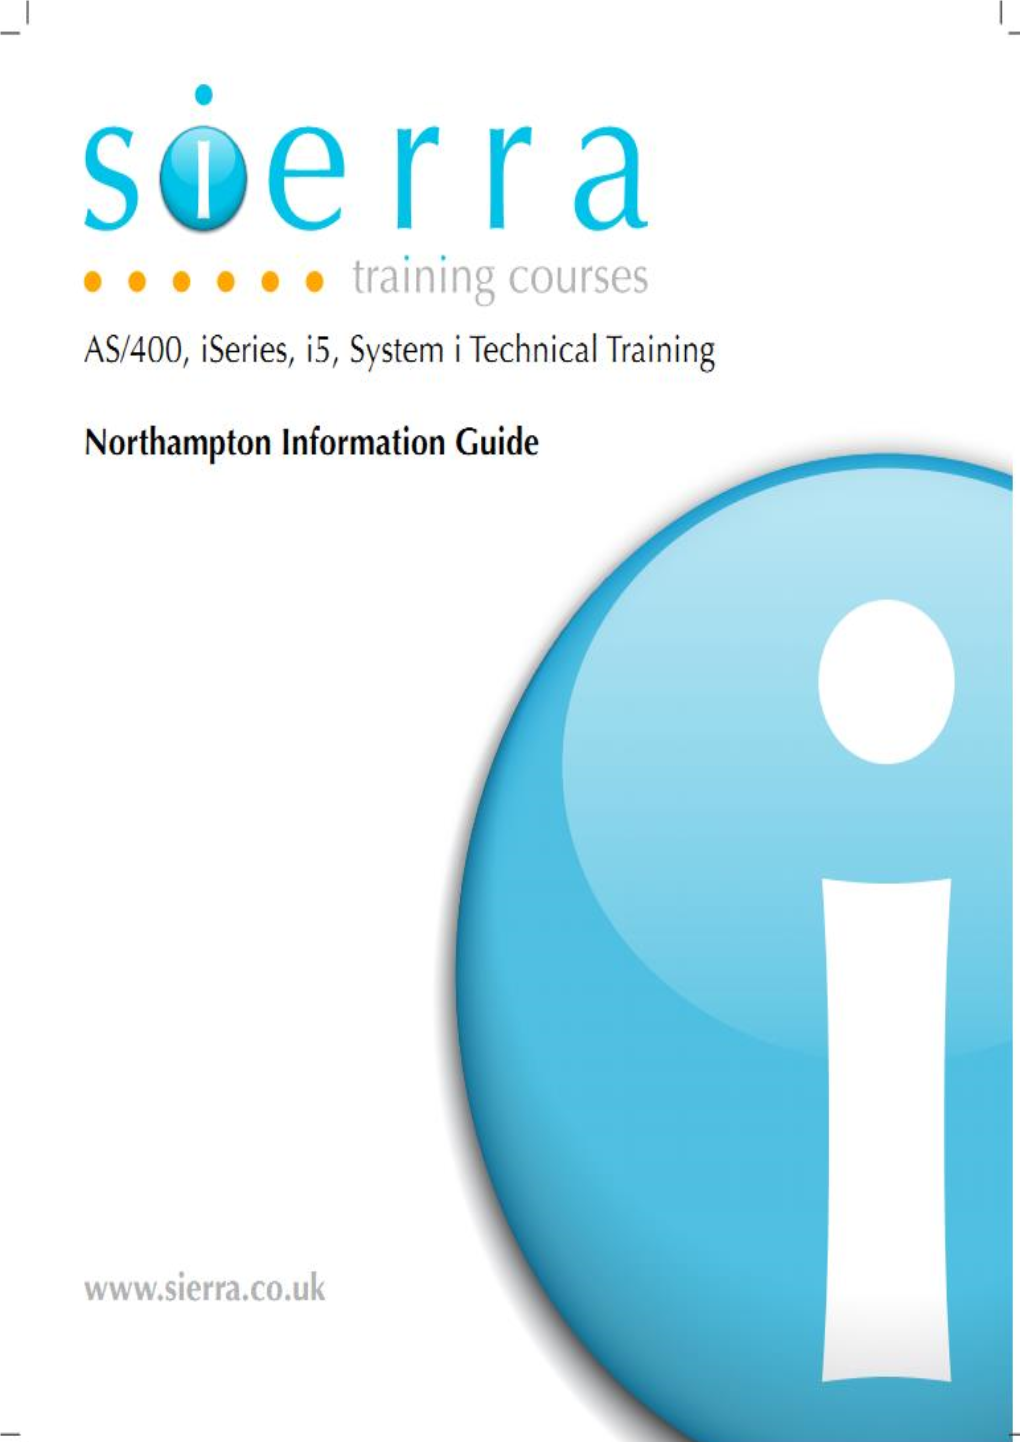 Download Our Information Guide Here